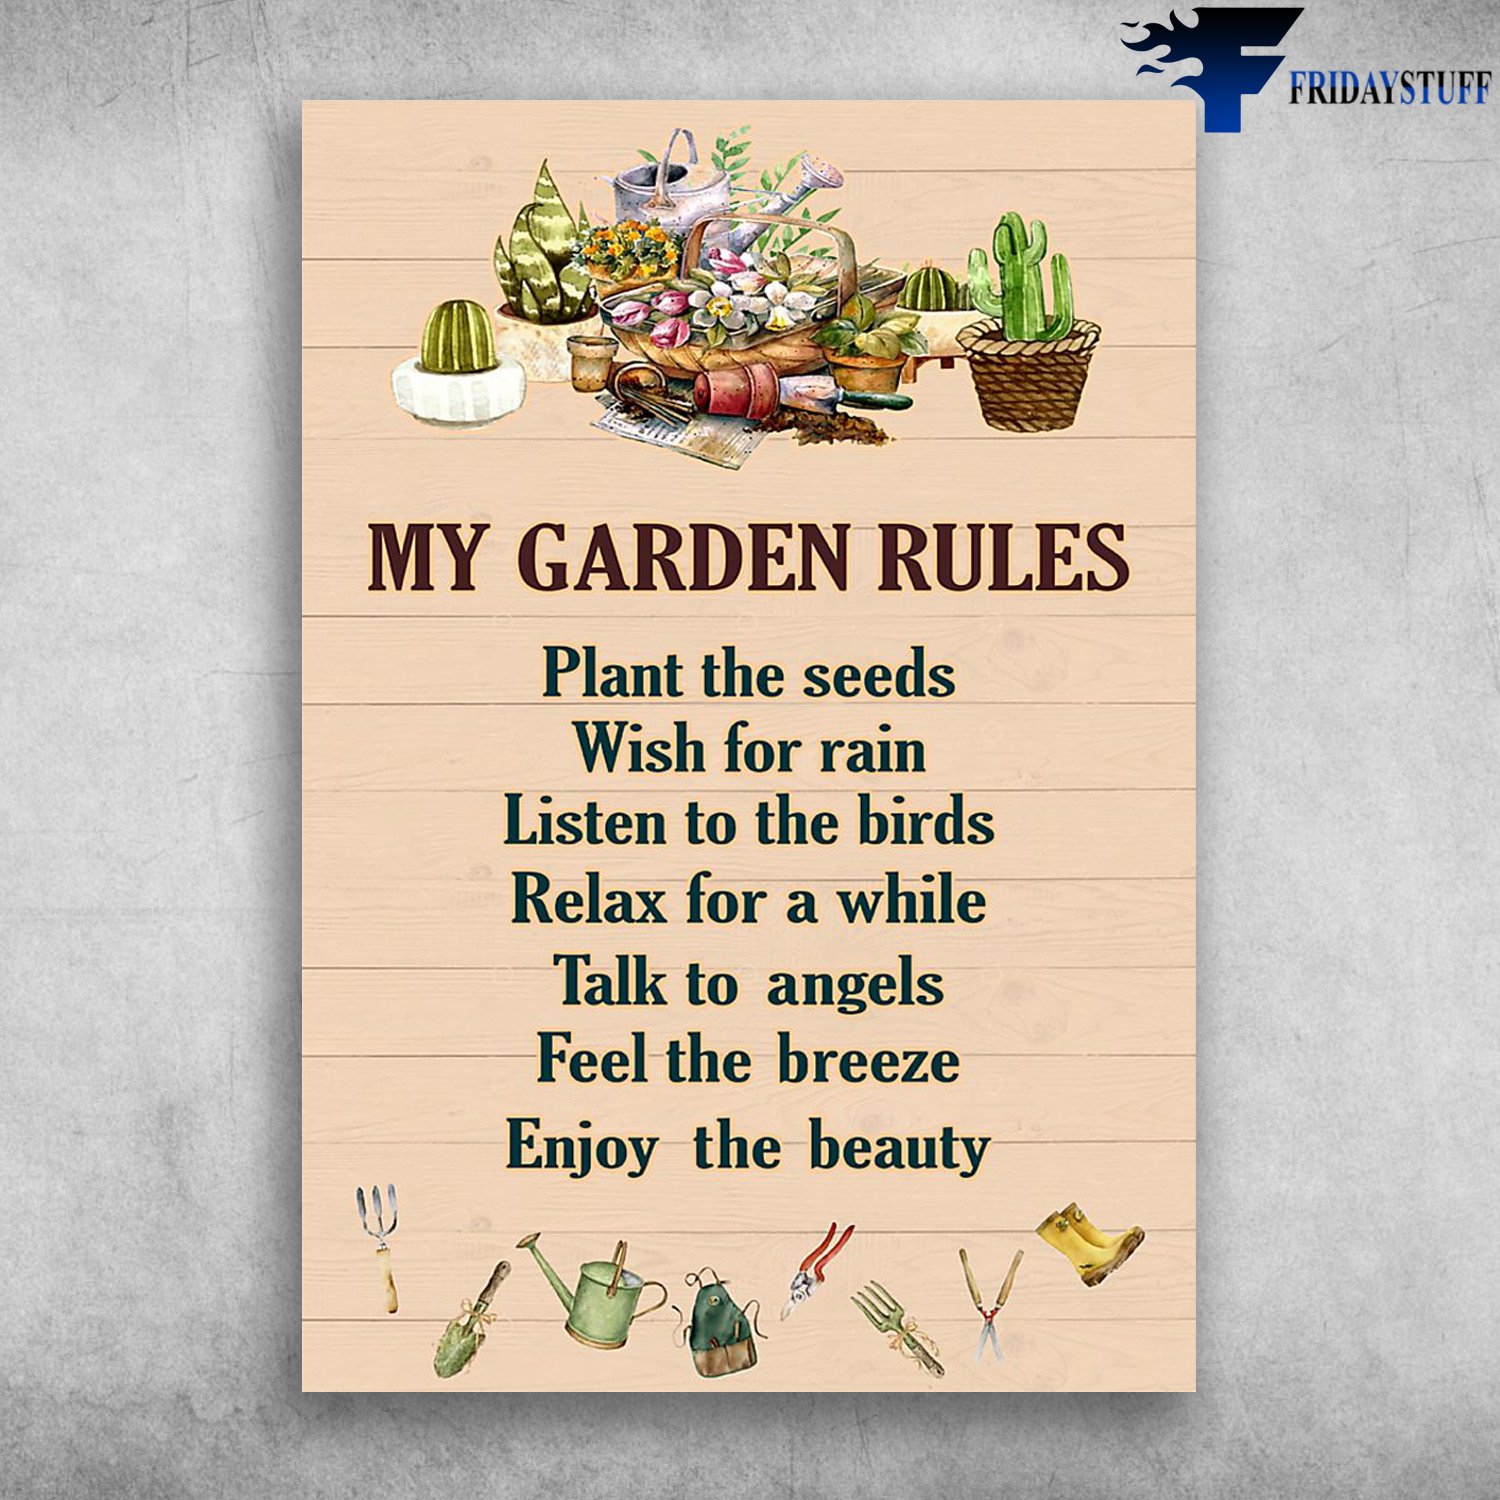 Garden Rules - My Garden Rules, Plant The Seeds, Wish For Rain, Listen To The Birds, Relax For A While, Talk To Angels, Feel The Breeze, Enjoy The Beauty